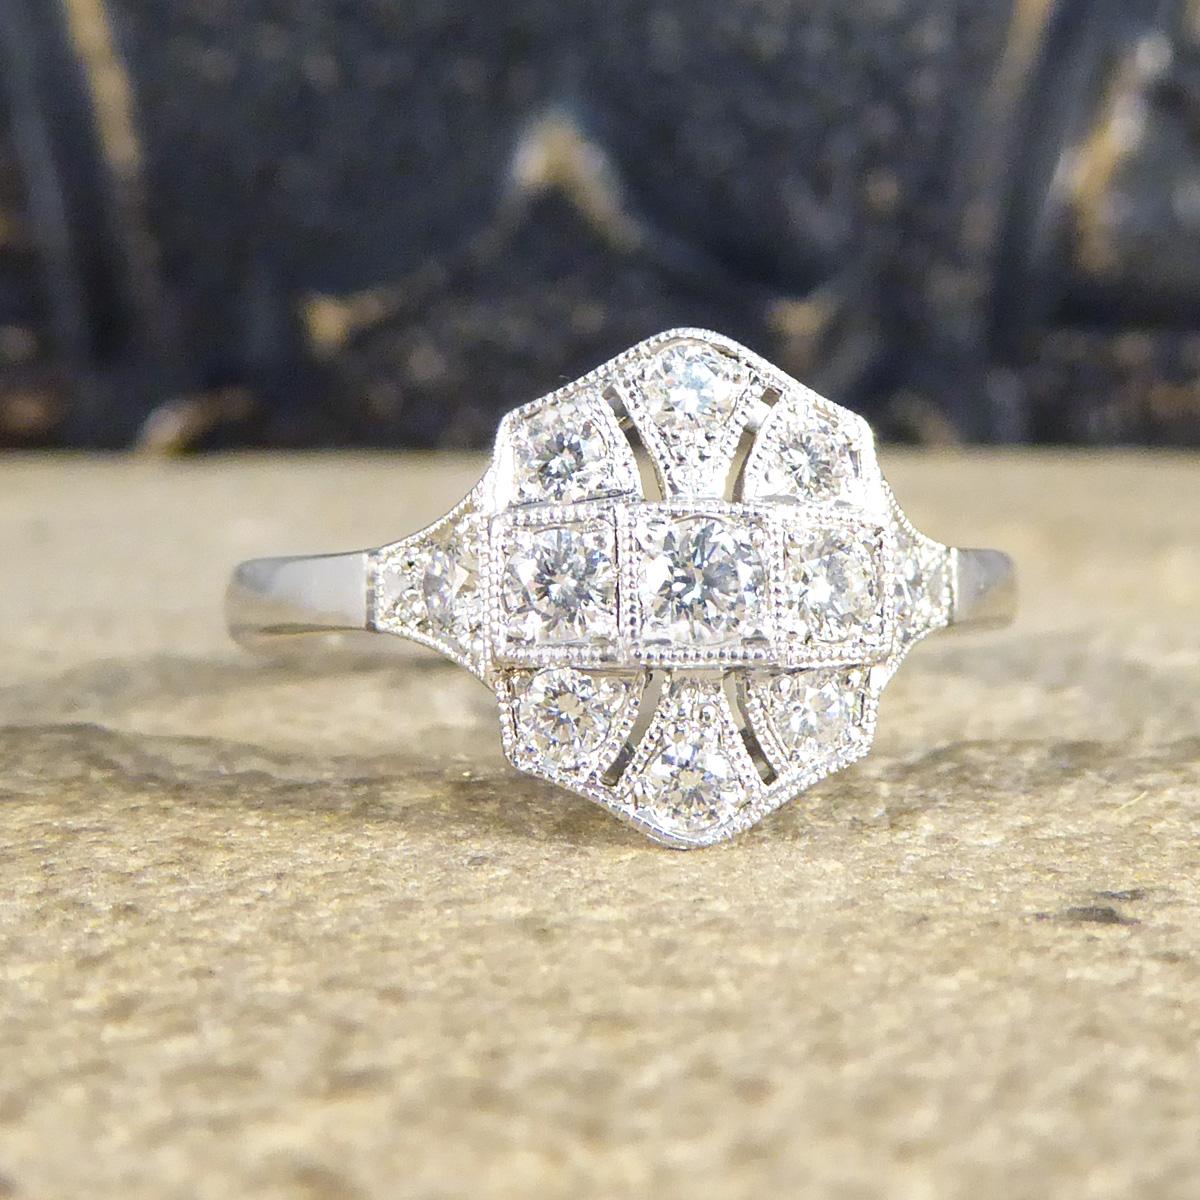 This gorgeous ring has been hand crafted and is new and never worn. It has been designed and carefully crafted to resemble an Art Deco style ring with such a quality feel to it. This ring is set with an array of Brilliant Cut Diamonds all